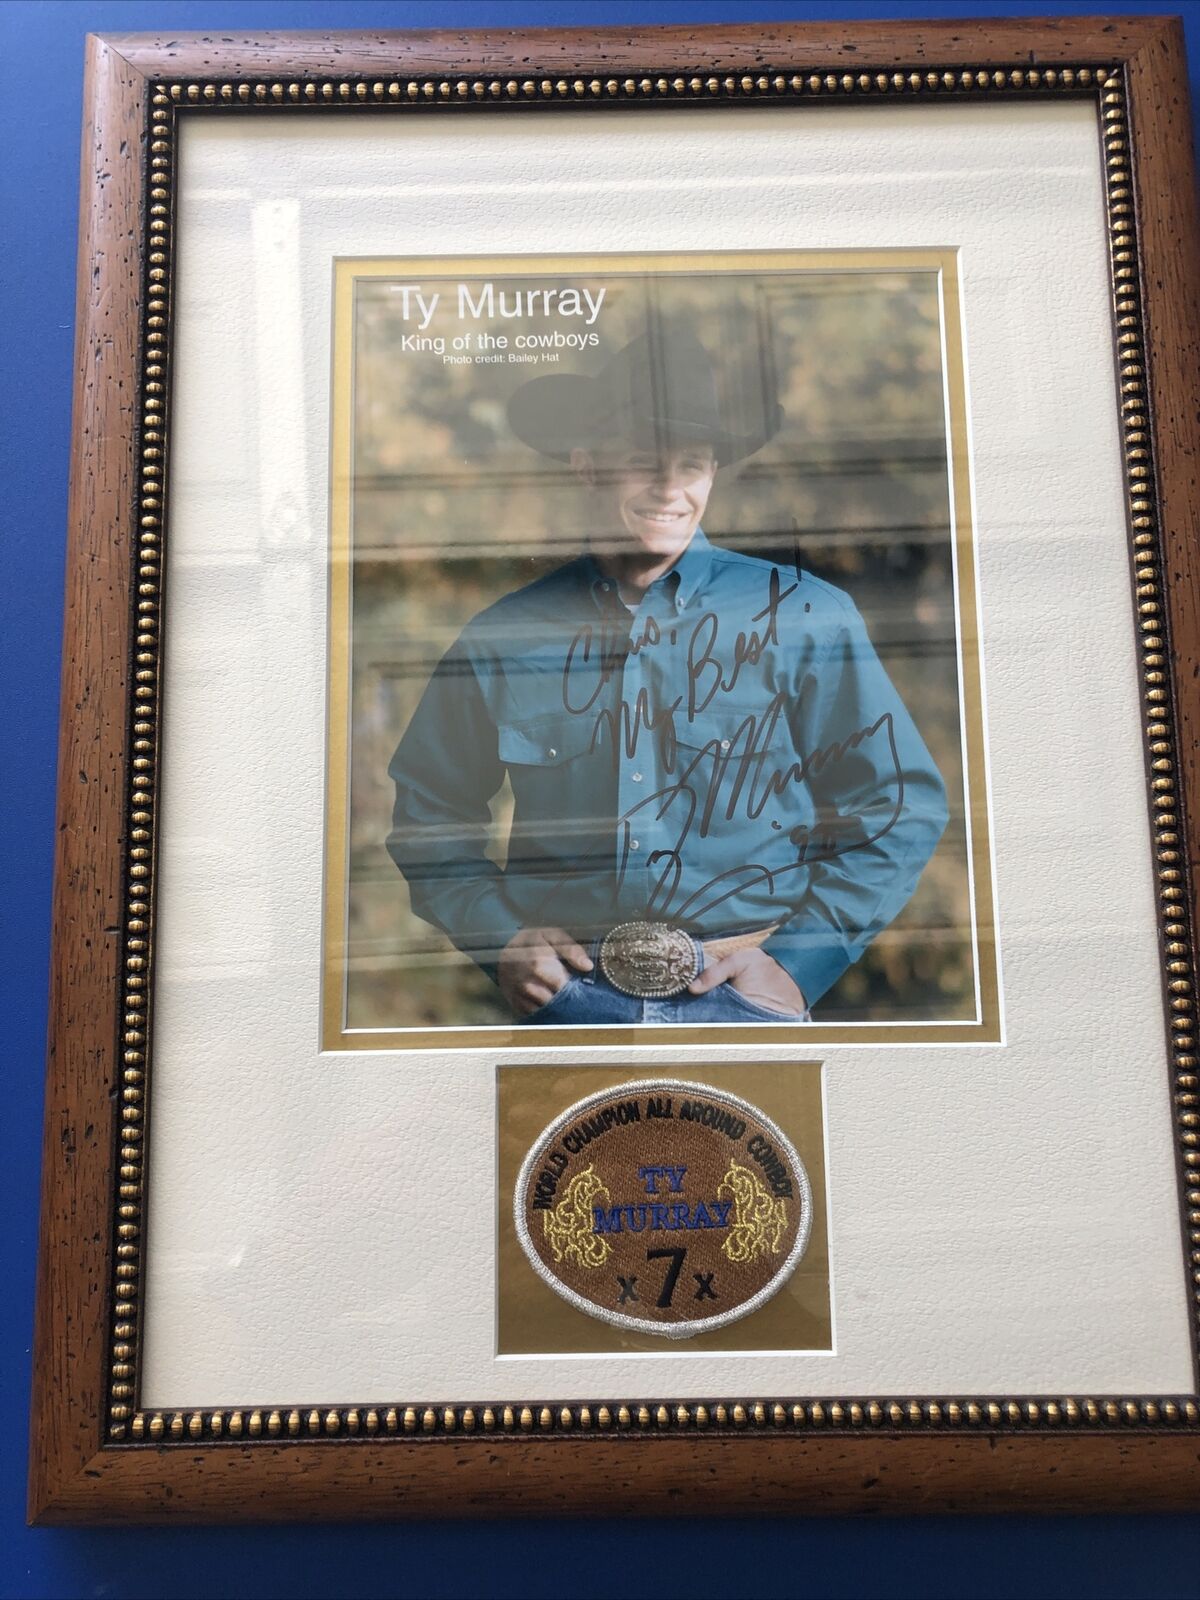 Ty Murray King Of The Cowboys Frame Photo Autograph 18”X14”